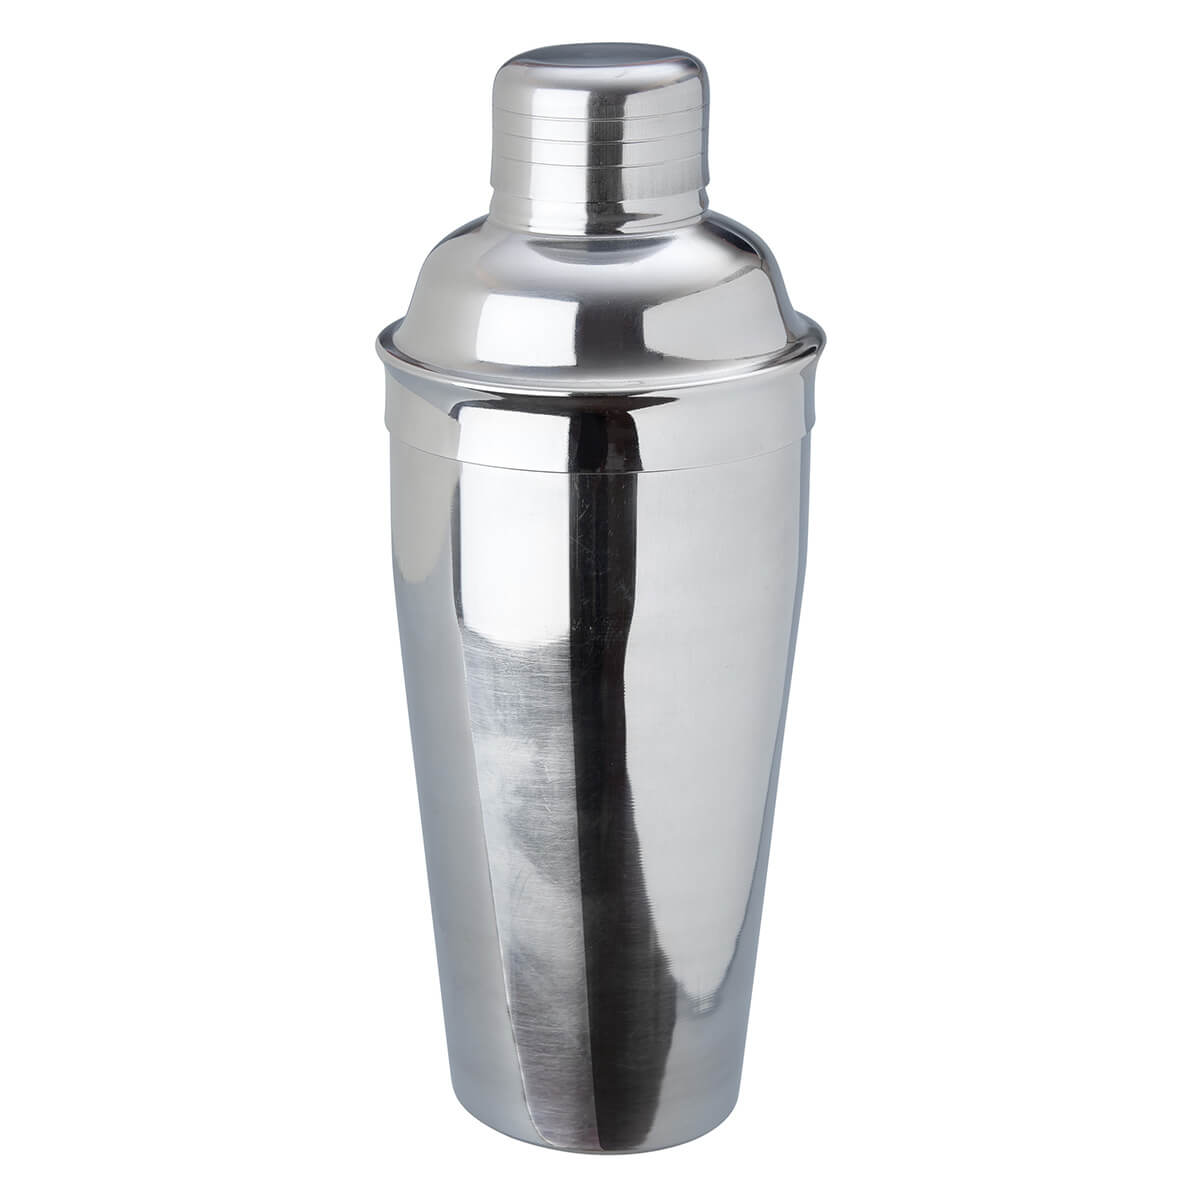 http://worldflairassociation.com/wp-content/uploads/2016/11/wfa_Deluxe-Cocktail-Shaker_Stainless-Steel.jpg